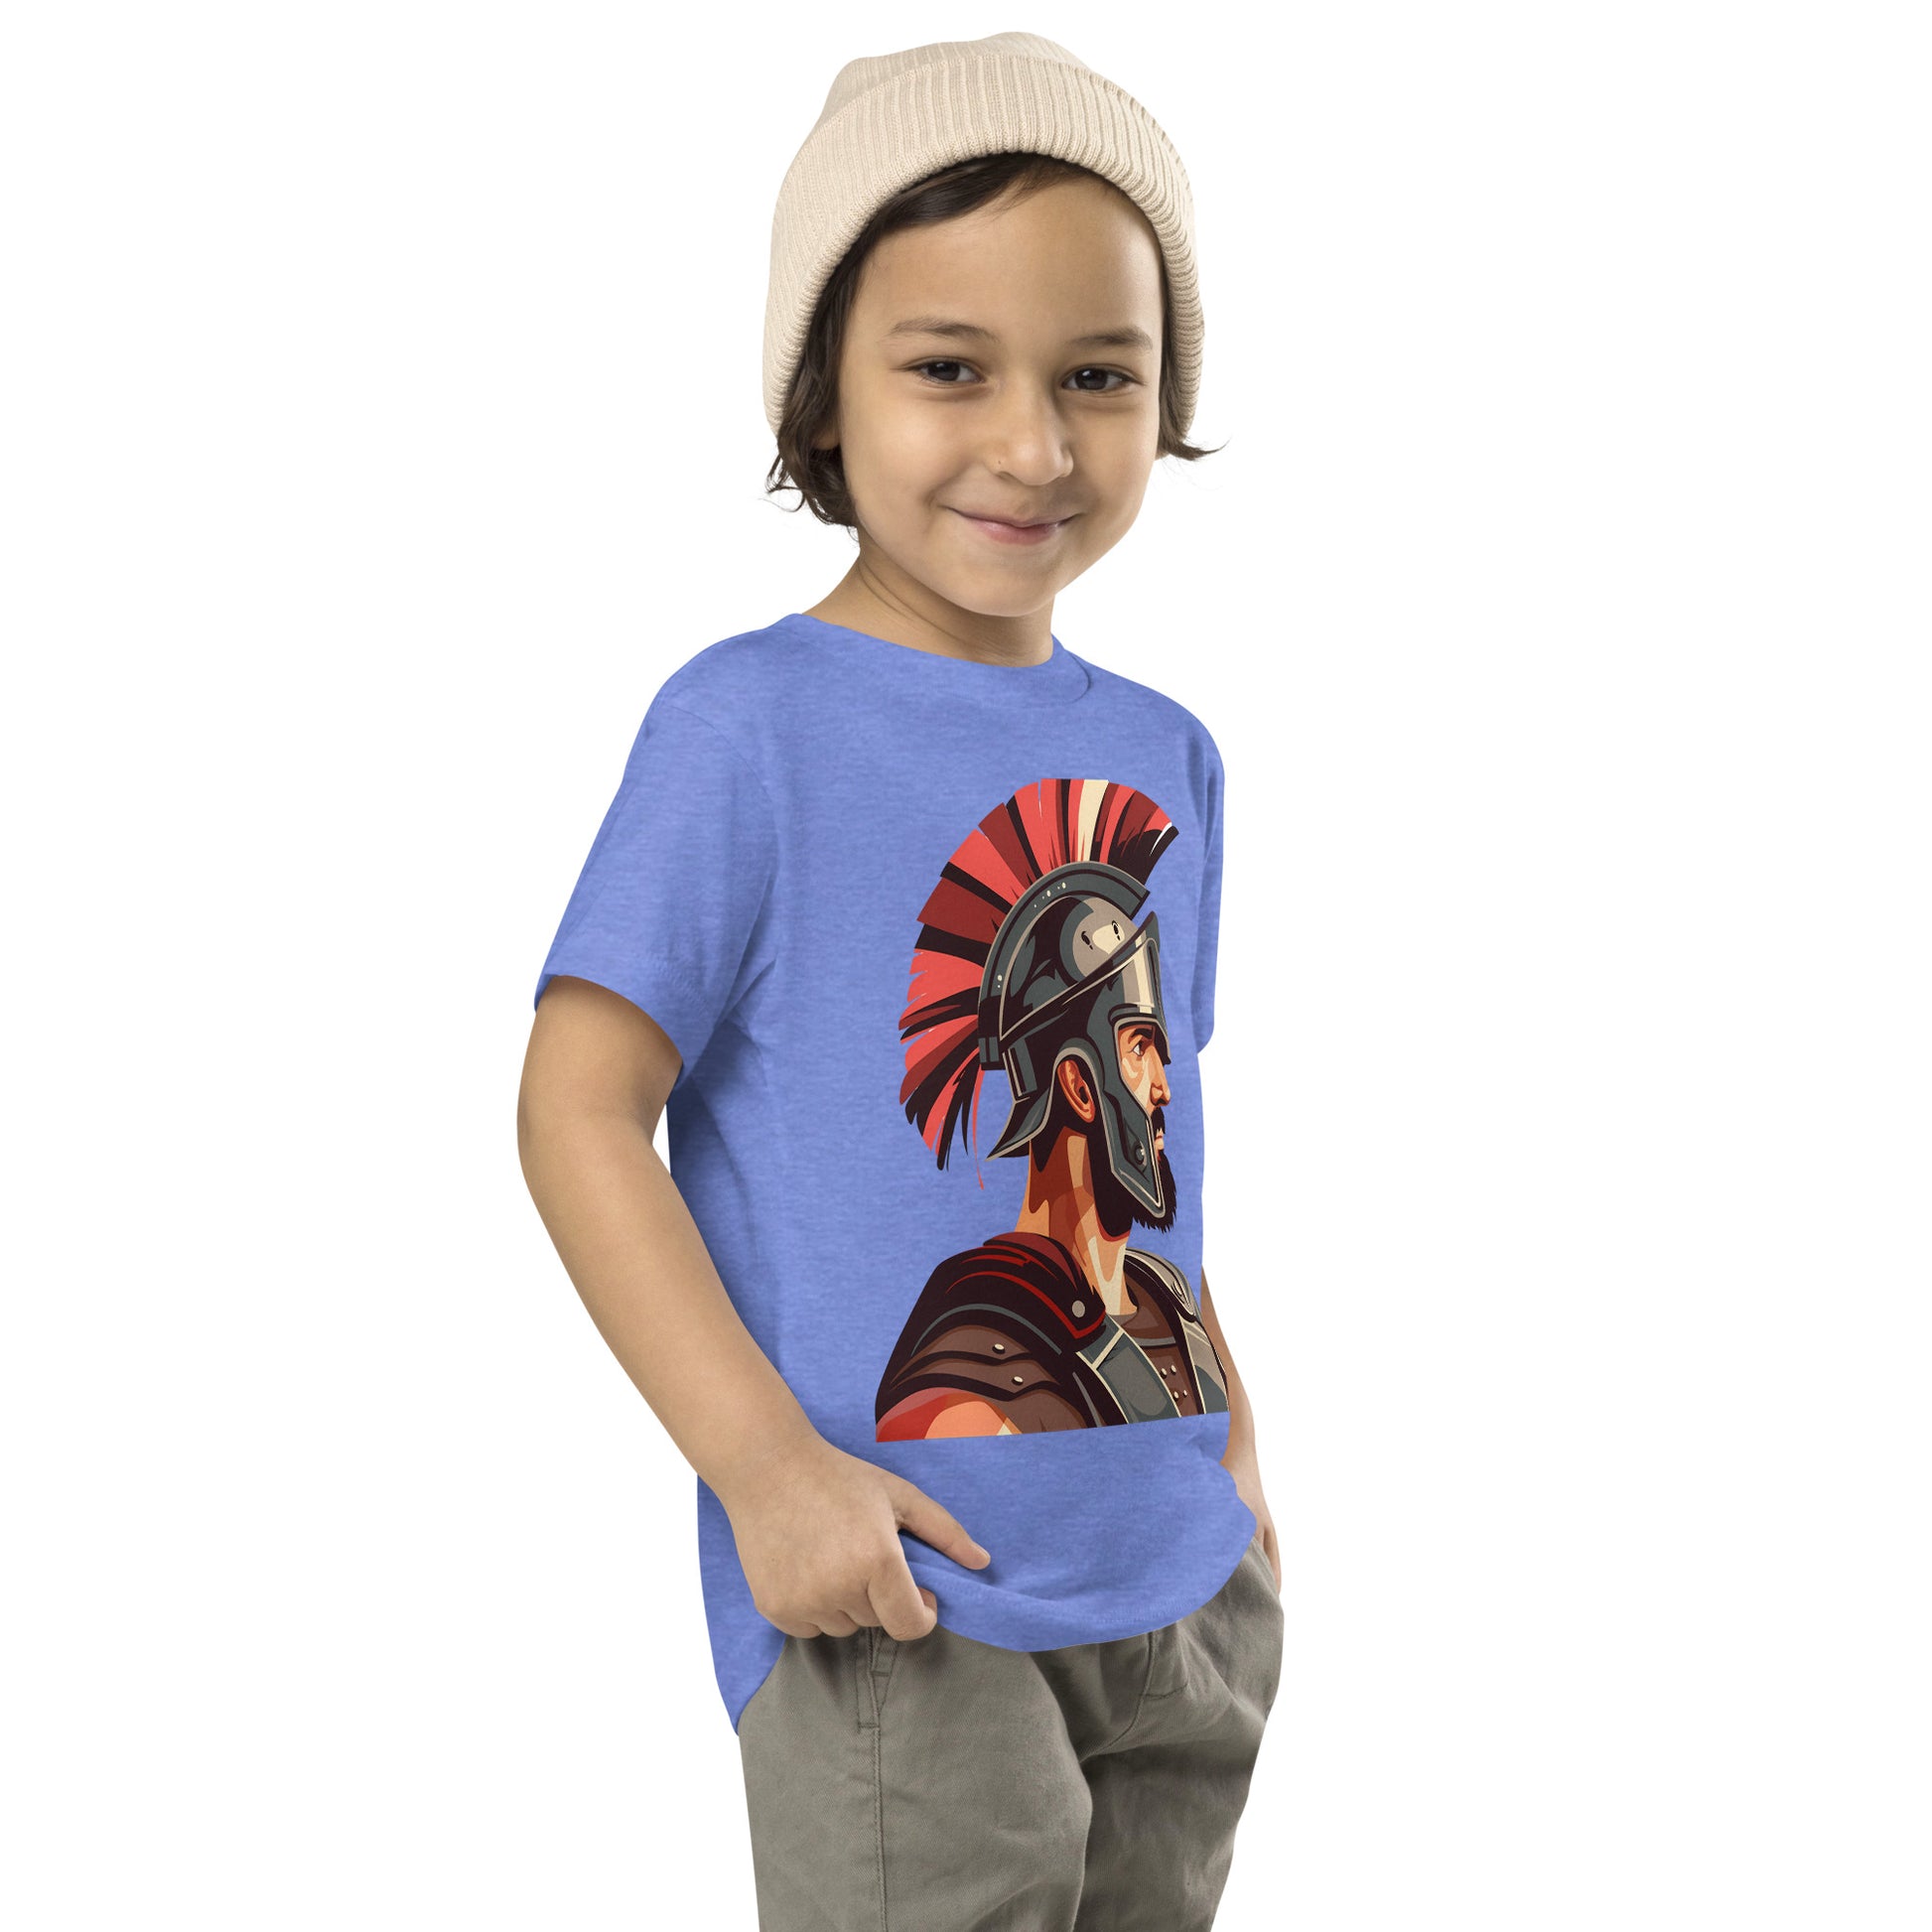 Toddler with a colombia blue T-shirt with a print of a warrior